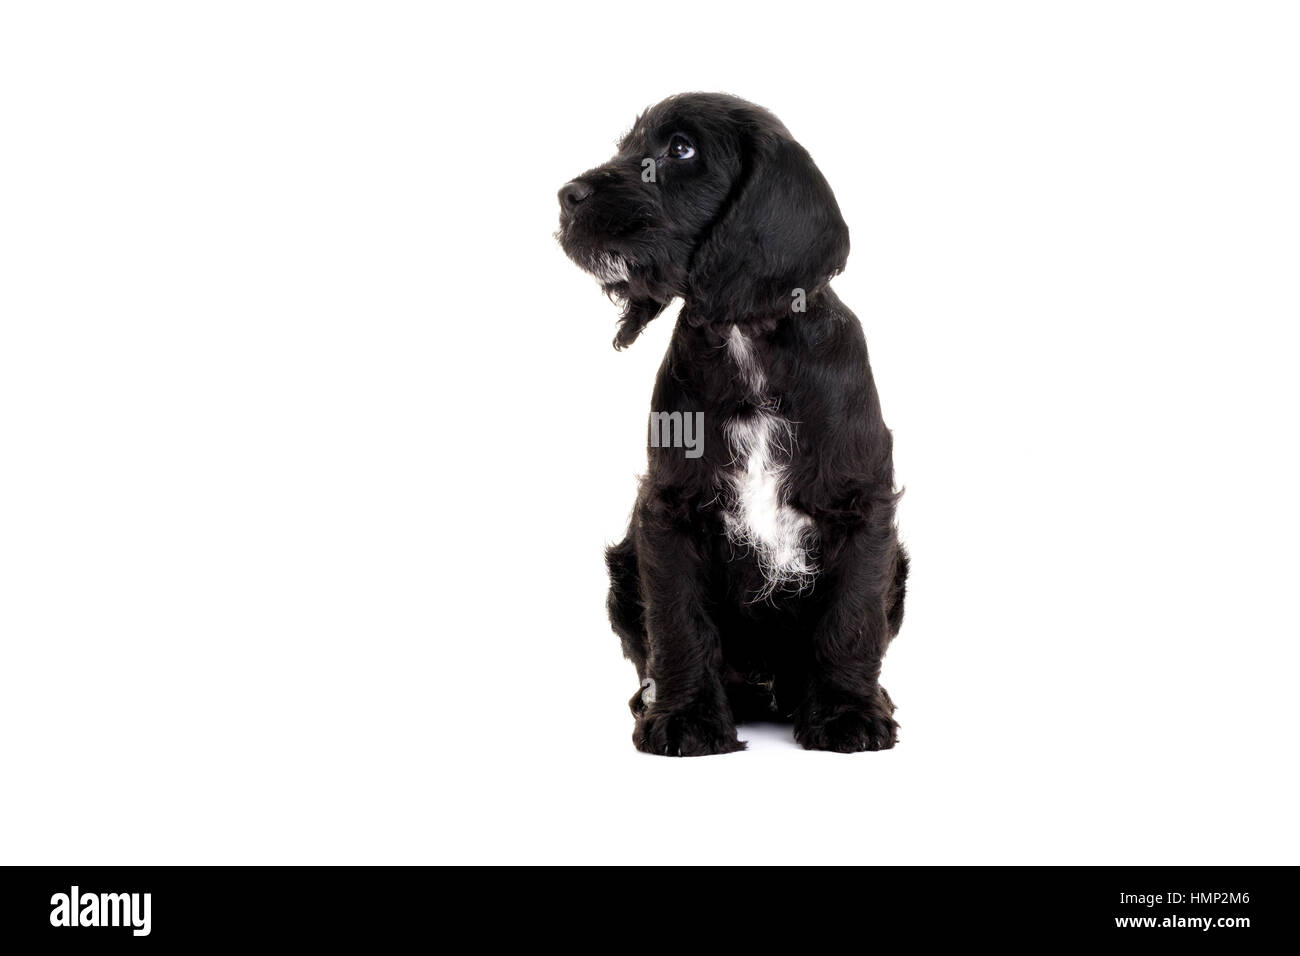 A studio shot of a cute Cockapoo, eight week old puppy taken against a plain white background Stock Photo